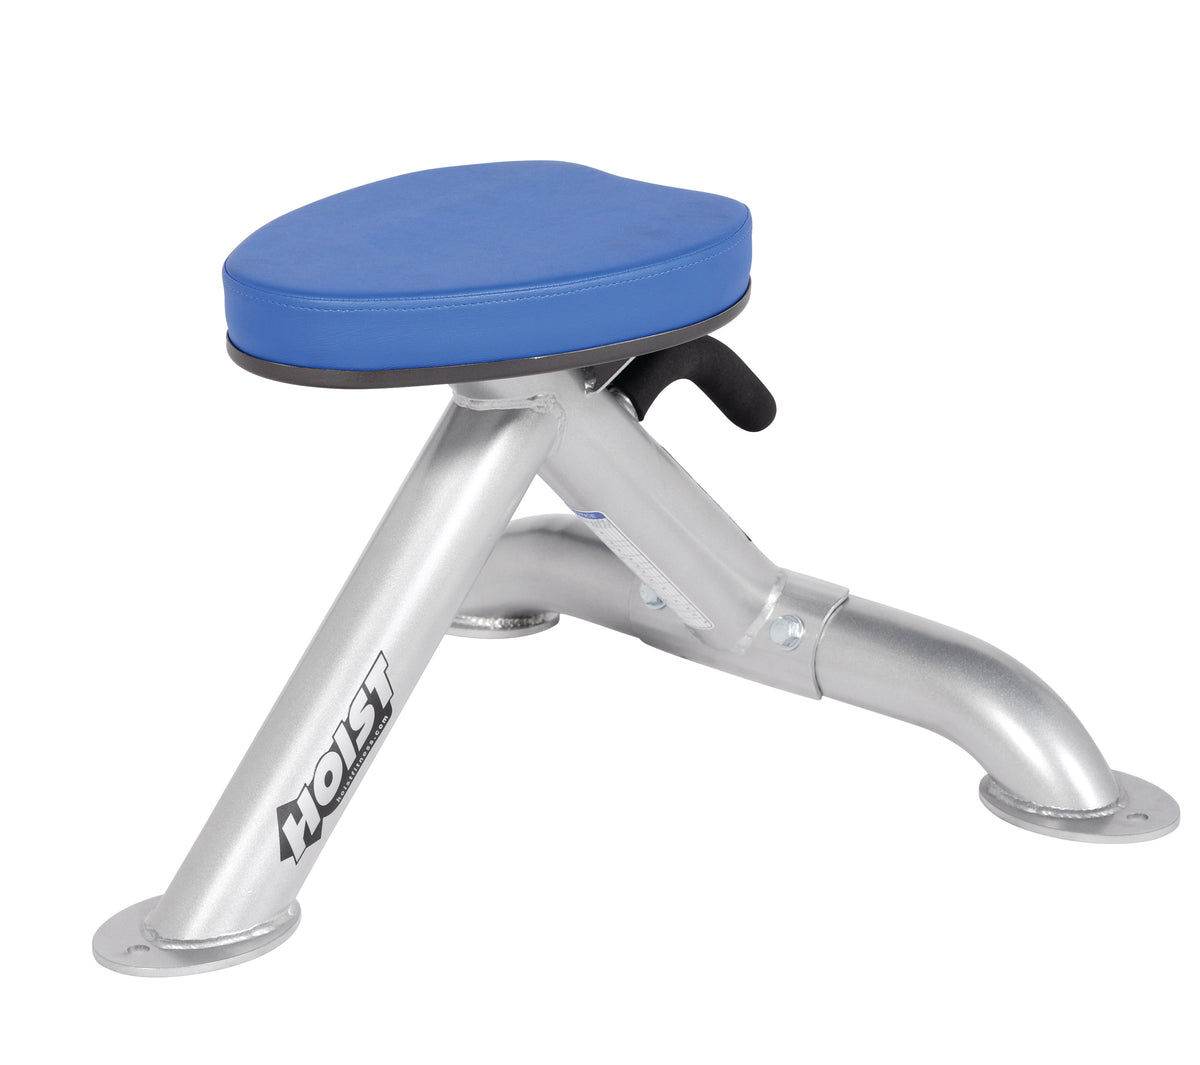 Hoist Fitness CF-3950 Utility Stool with blue upholstery | Fitness Experience